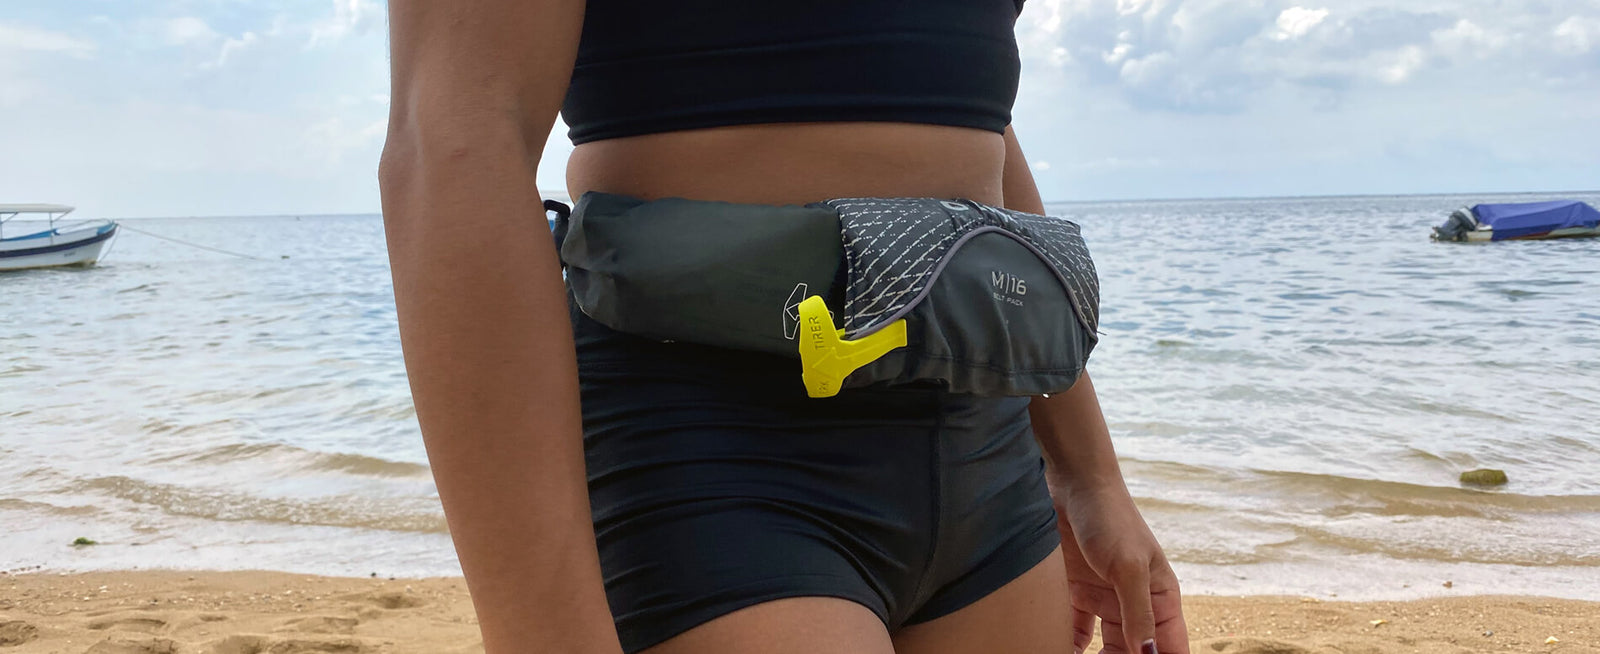 8 Belt Life Jackets to Give You More Freedom While Paddling - GILI